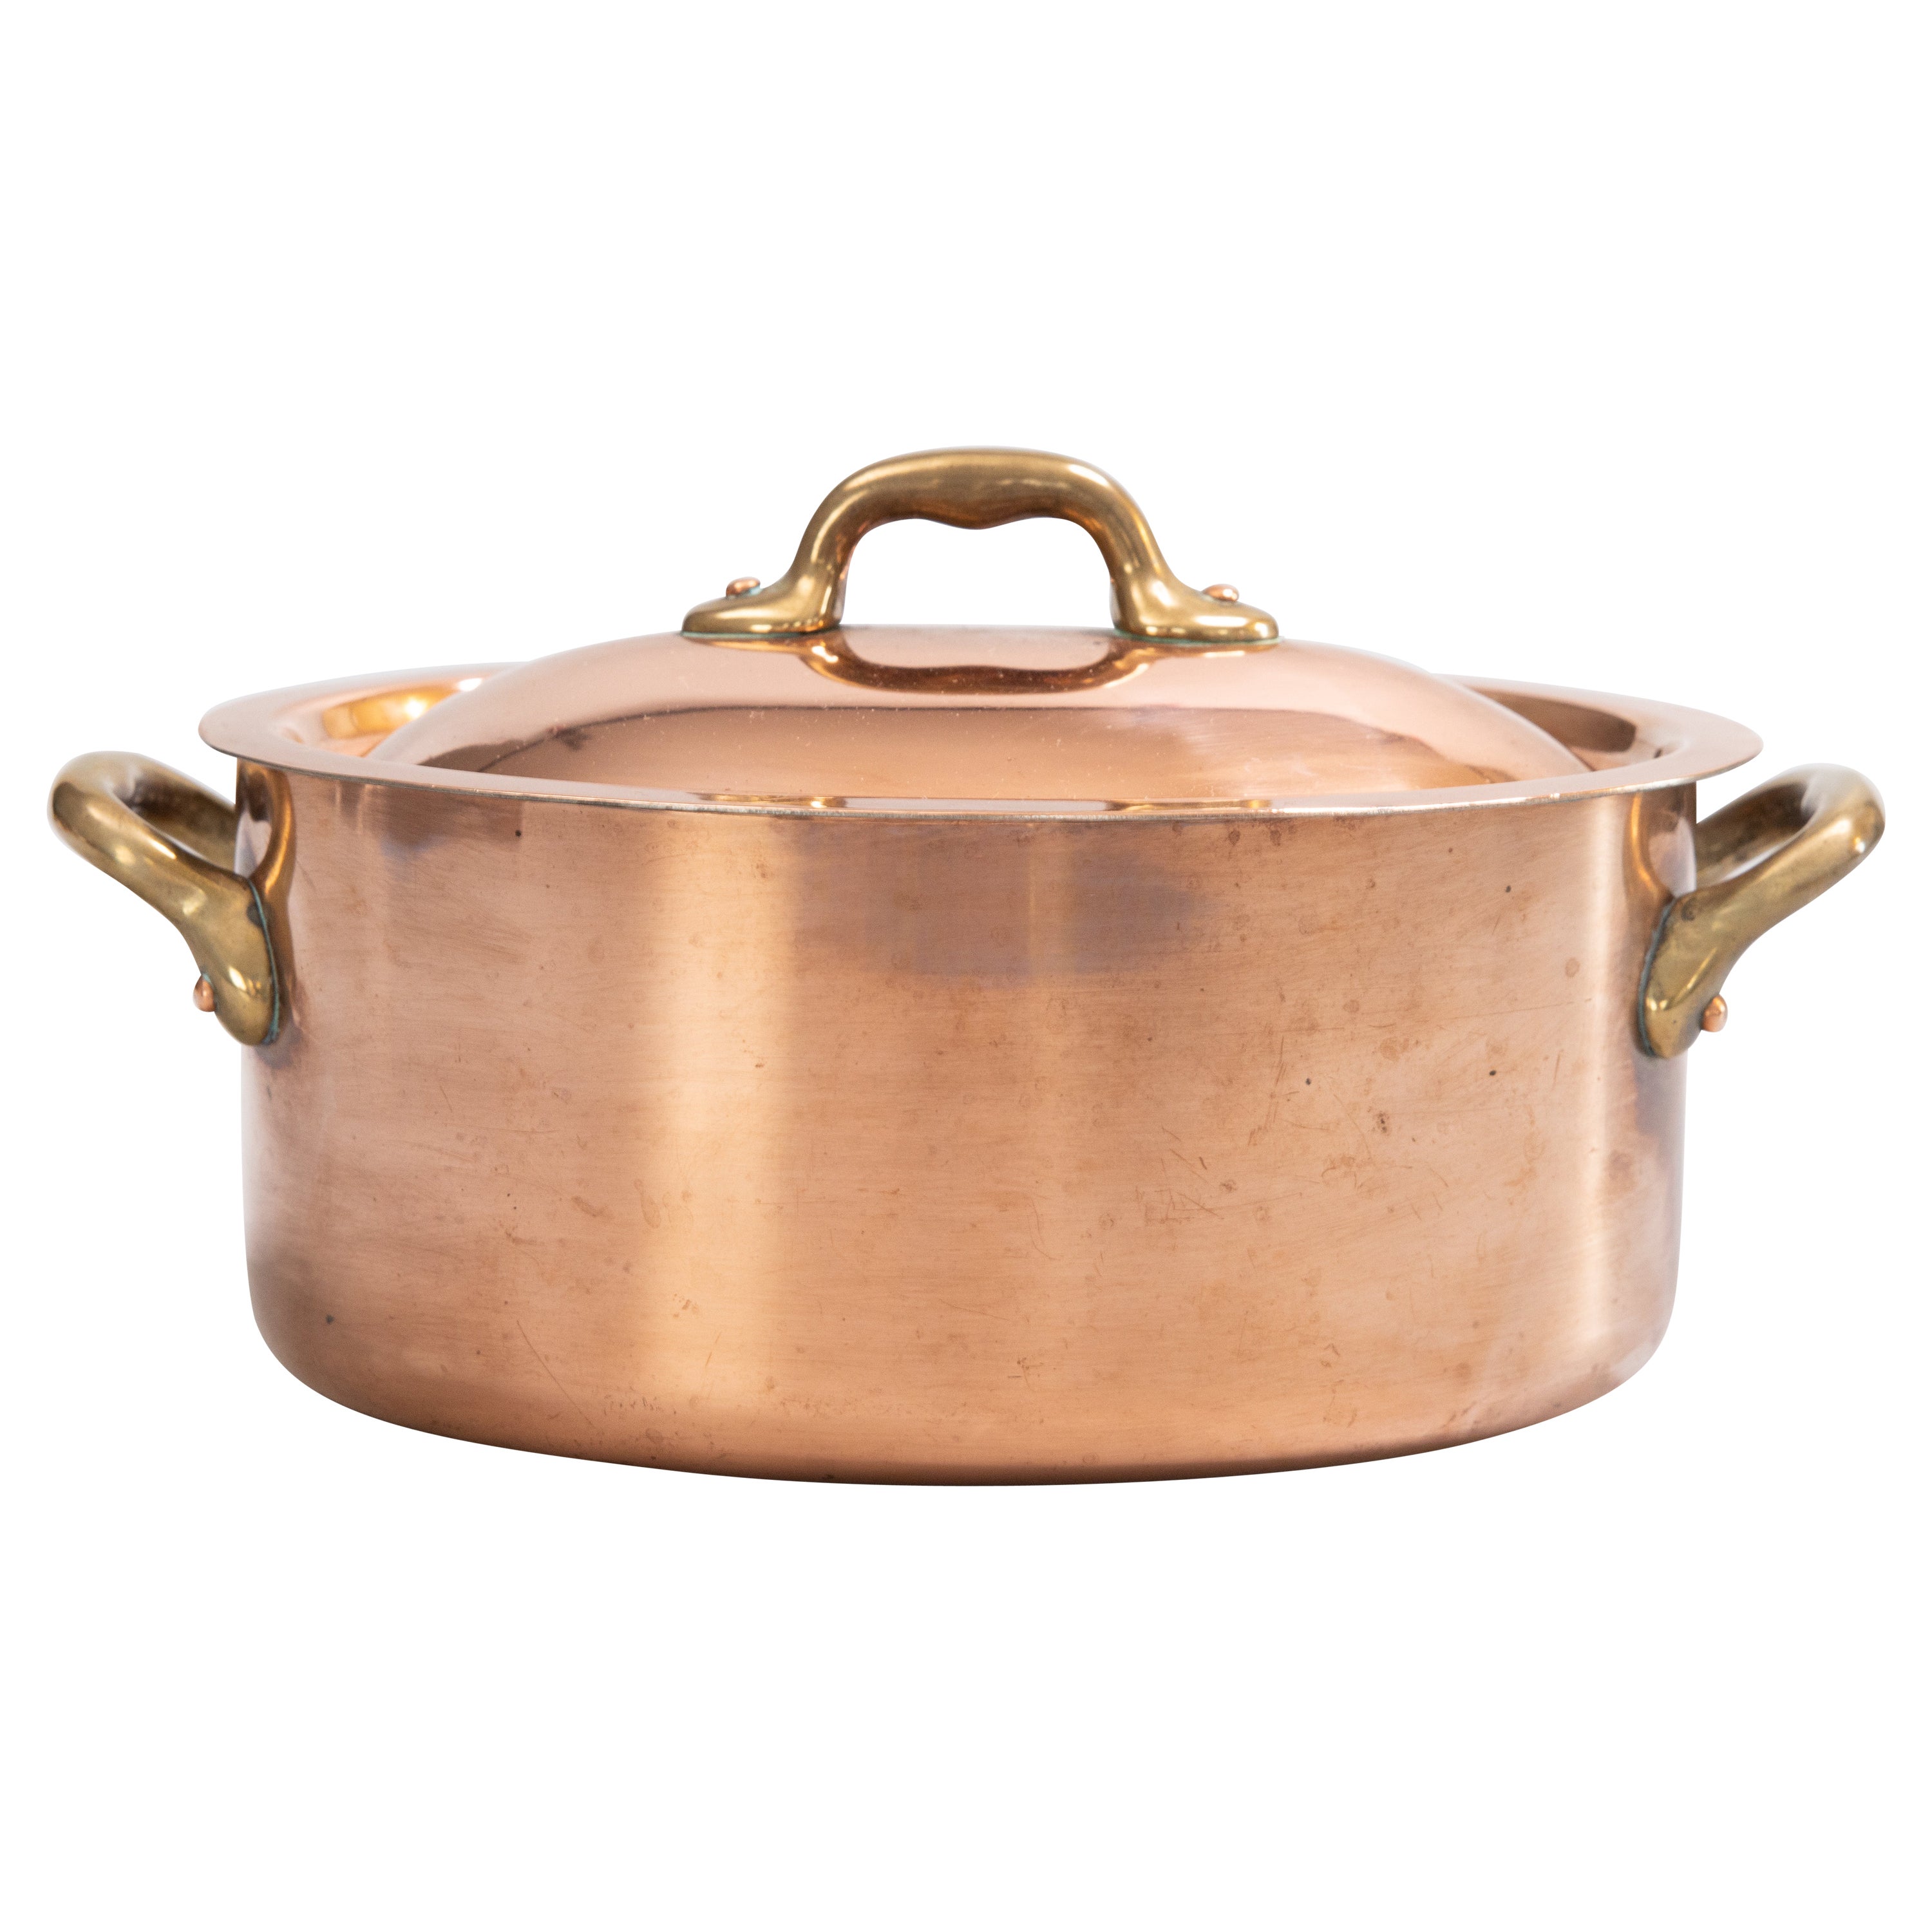 1930s French Lidded Oval Copper & Brass Handled Pot